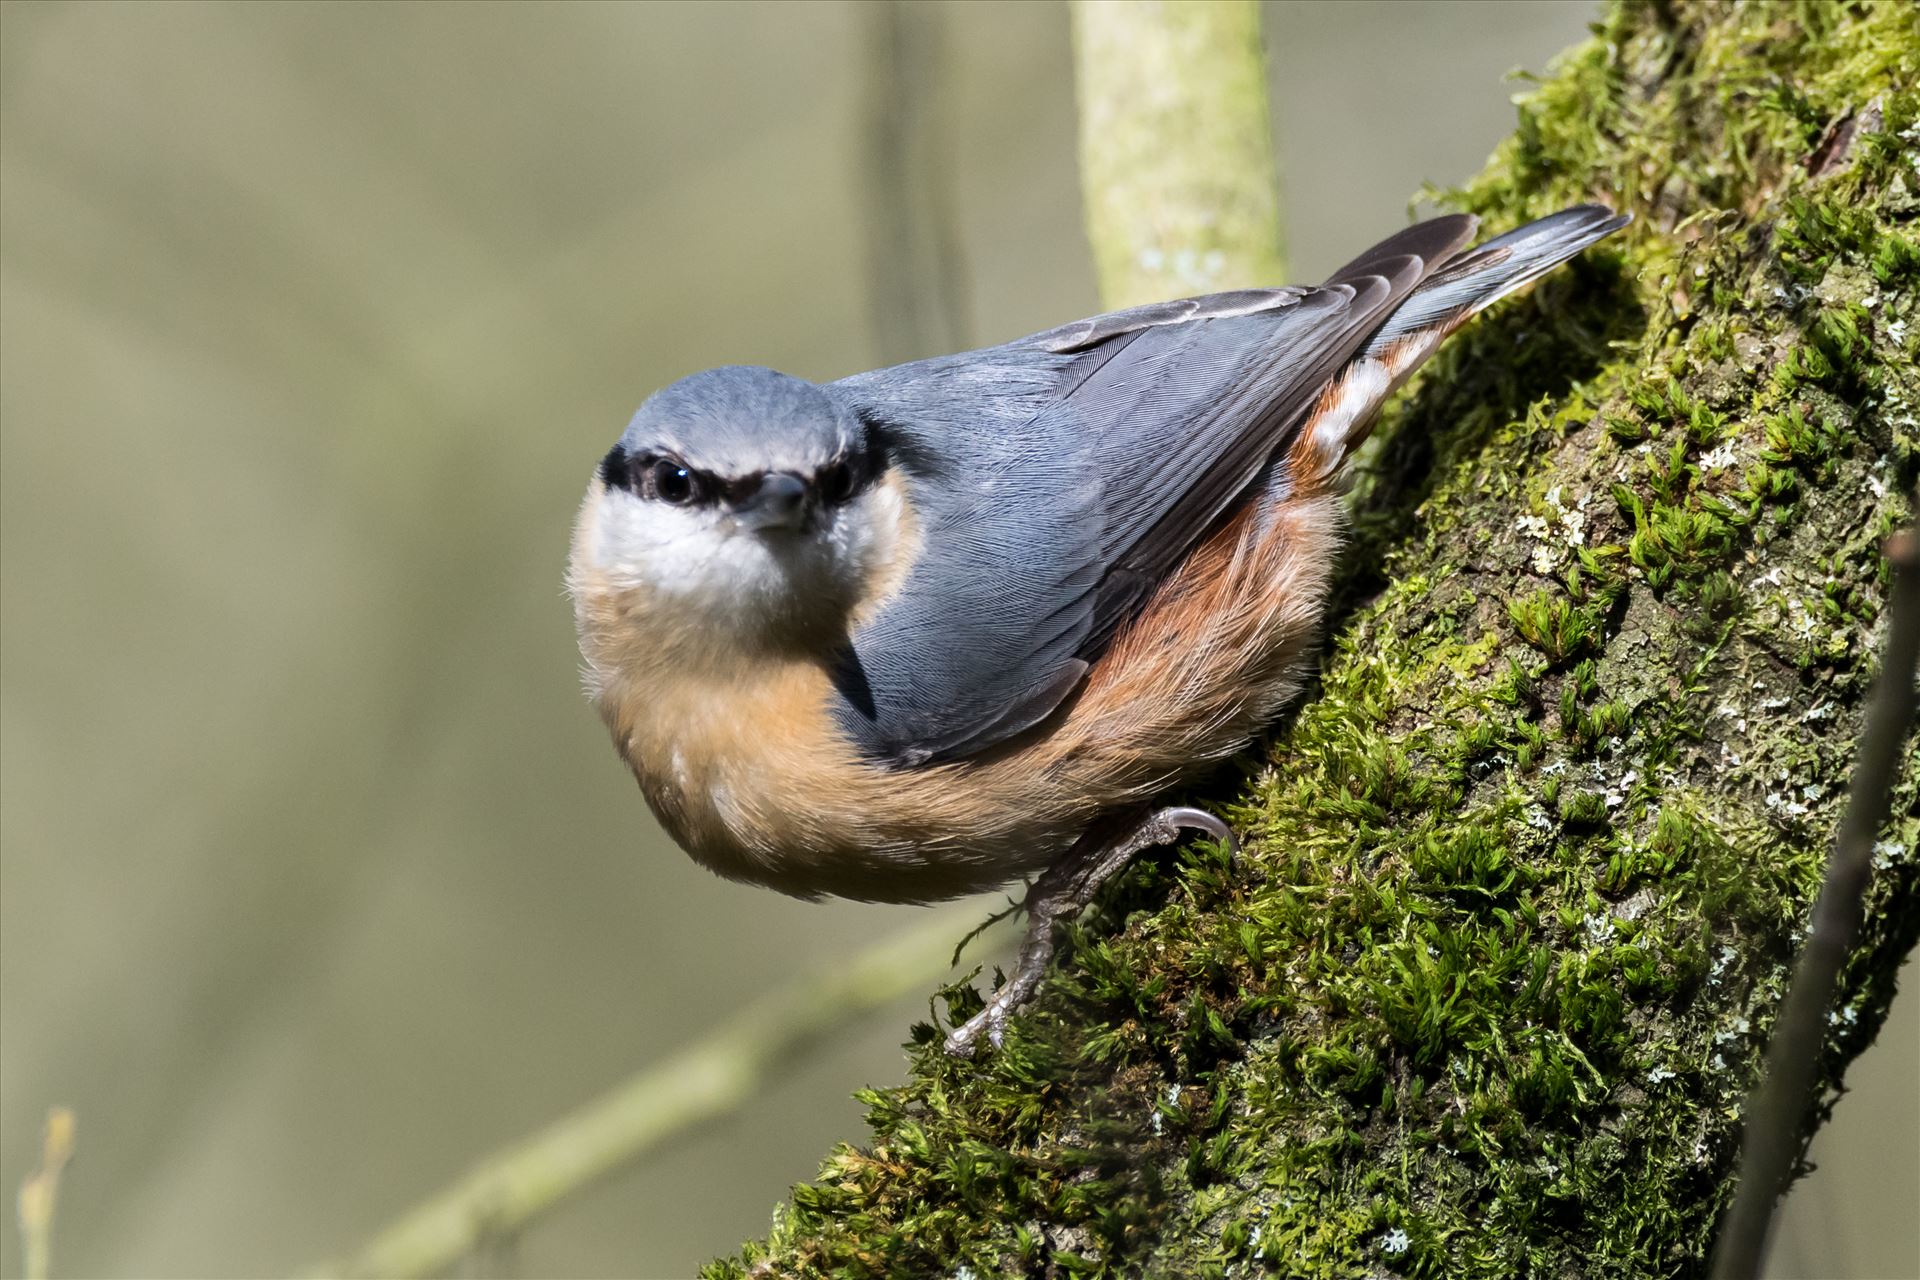 Nut Hatch - One of my favorite birds to photograph, thats if they stay still long enough by AJ Stoves Photography